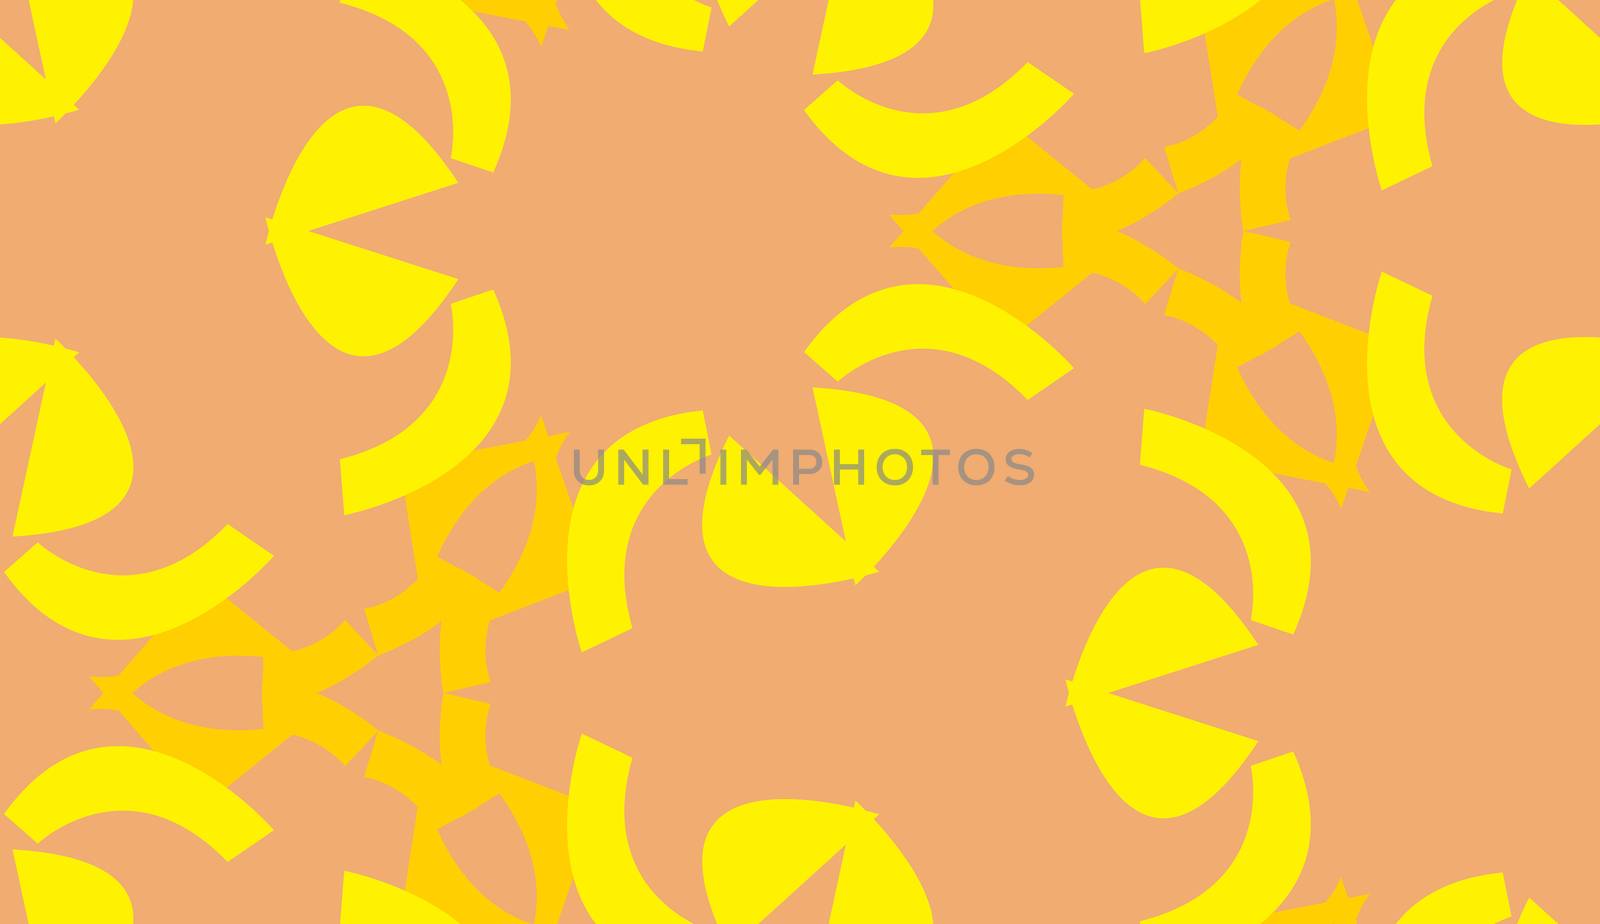 Seamless tiled pattern of various yellow shapes